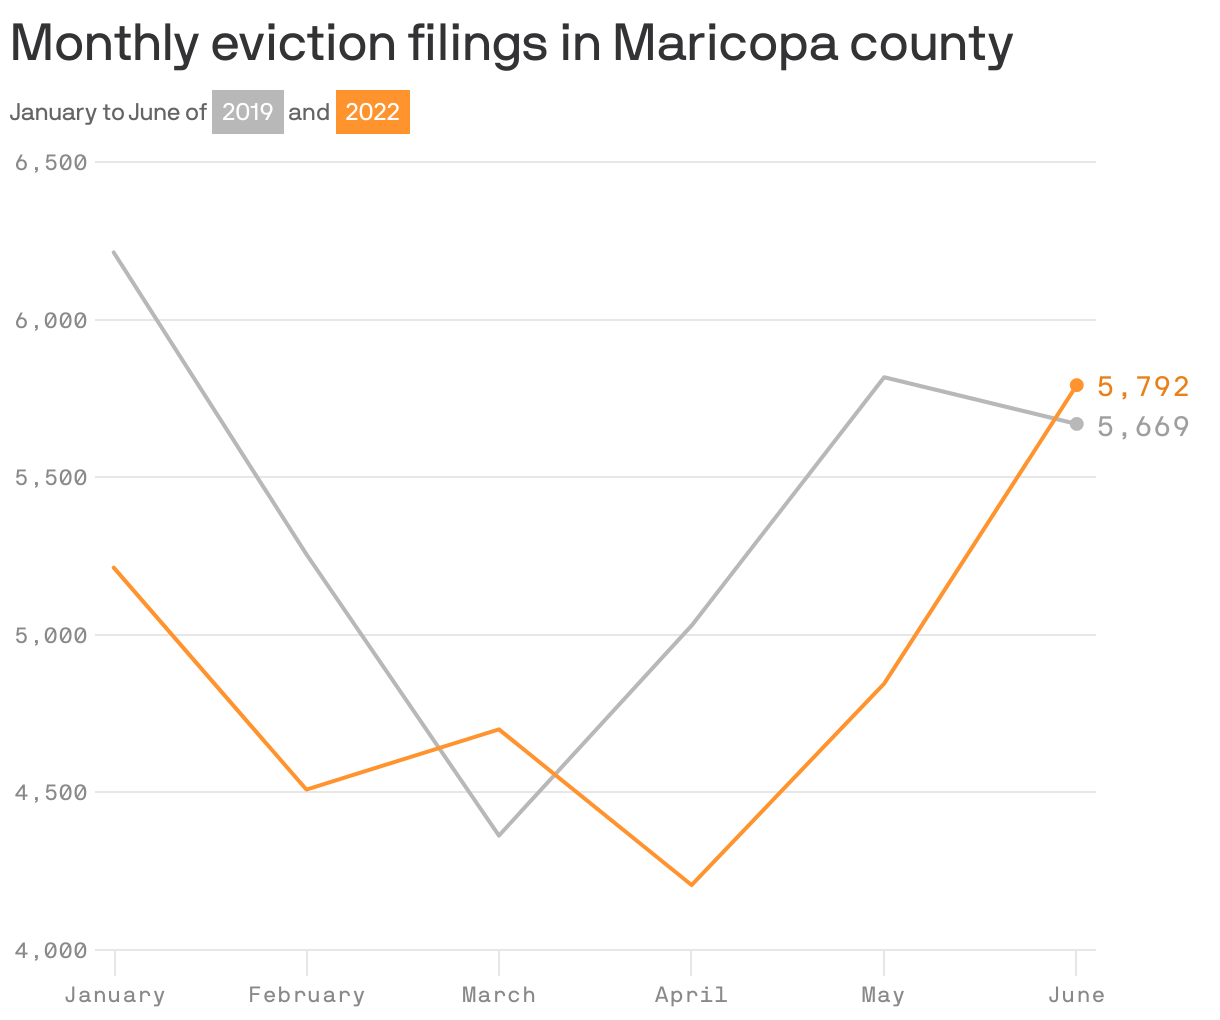 Monthly eviction filings in Maricopa county